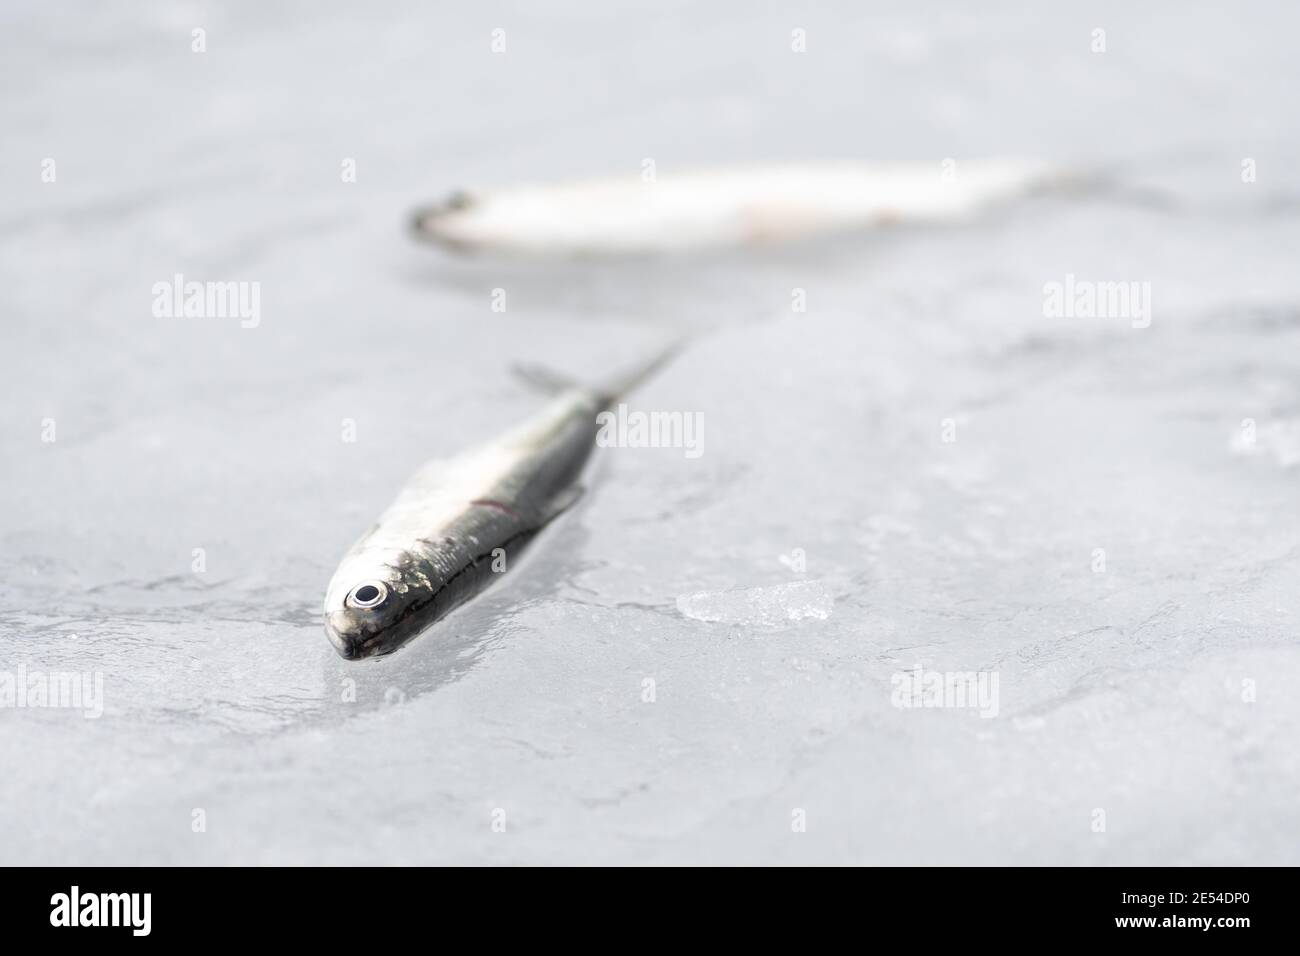 Coregonus albula fish, known as the vendace or as the European cisco, freshwater whitefish on the ice, fishing on a frozen lake, close up Stock Photo